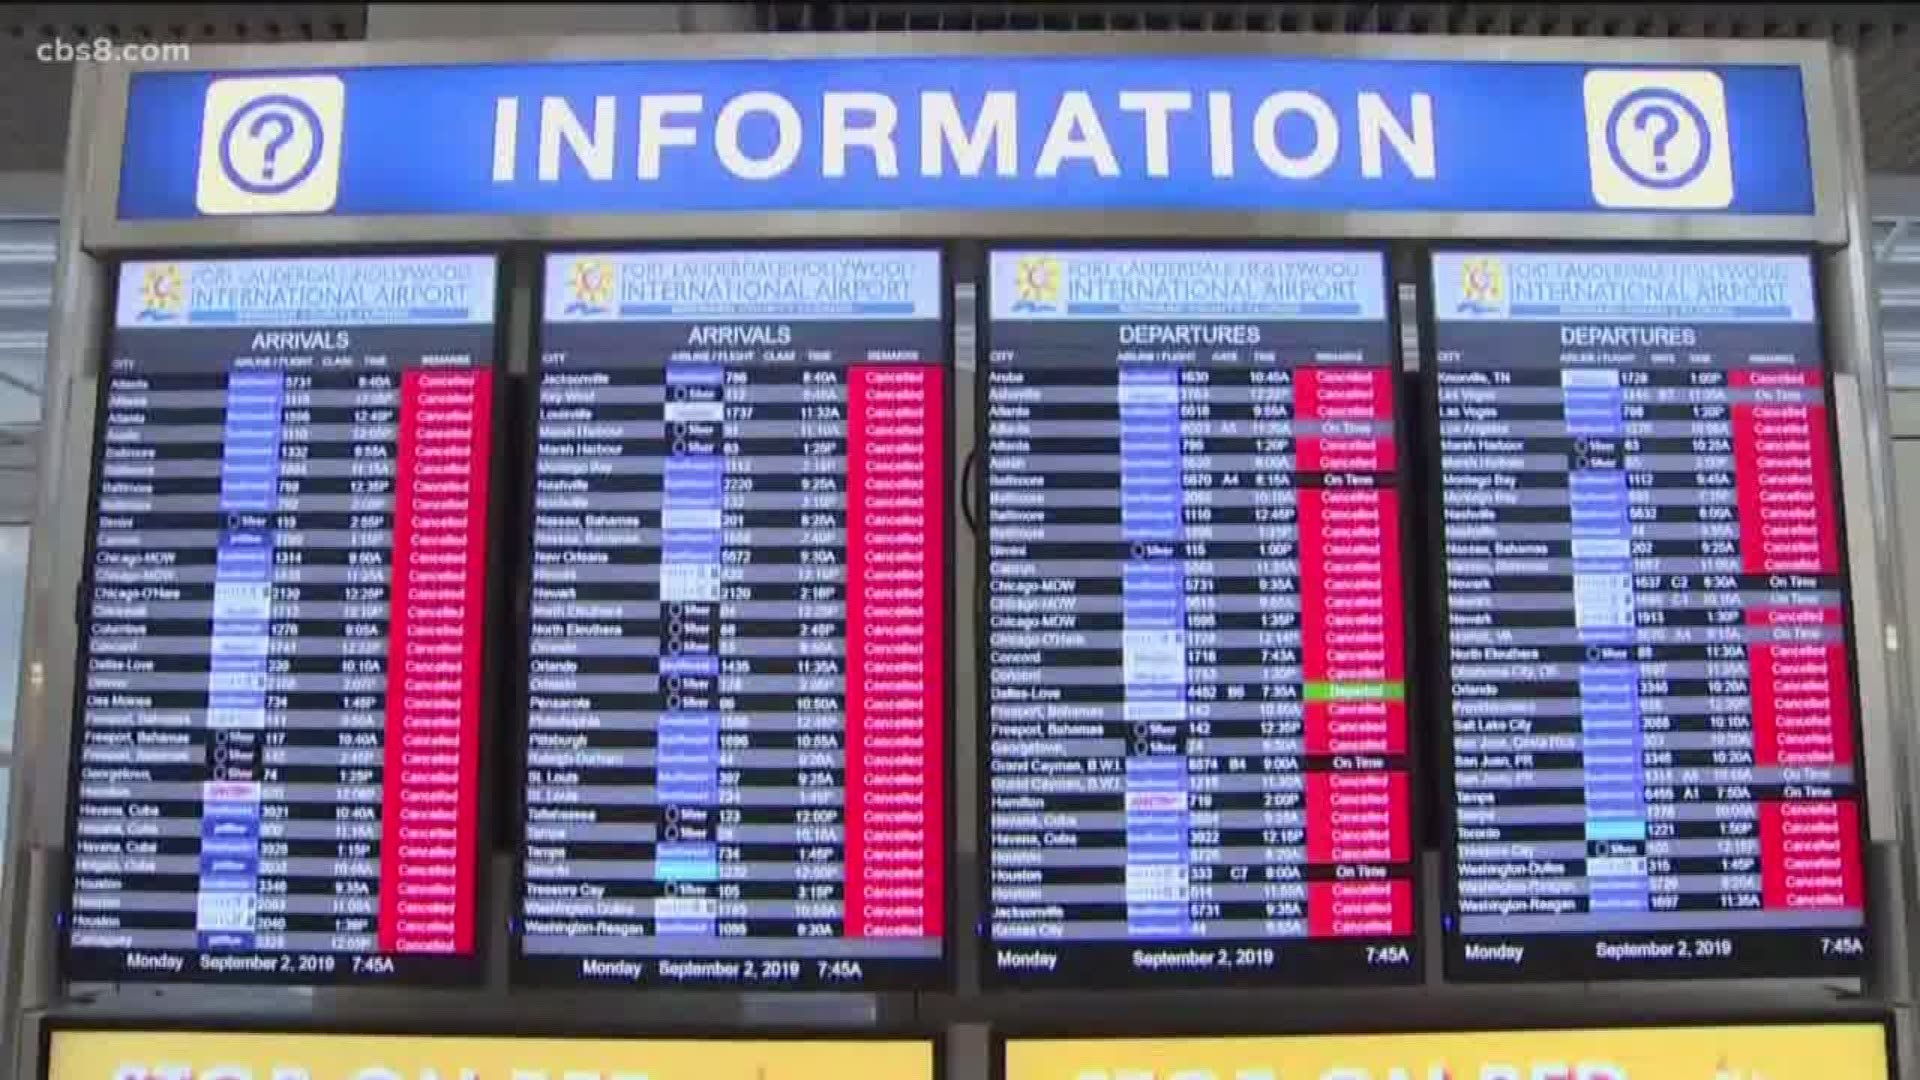 Tuesday's cancellations follow more than 1,500 flights canceled in the U.S. on Labor Day.